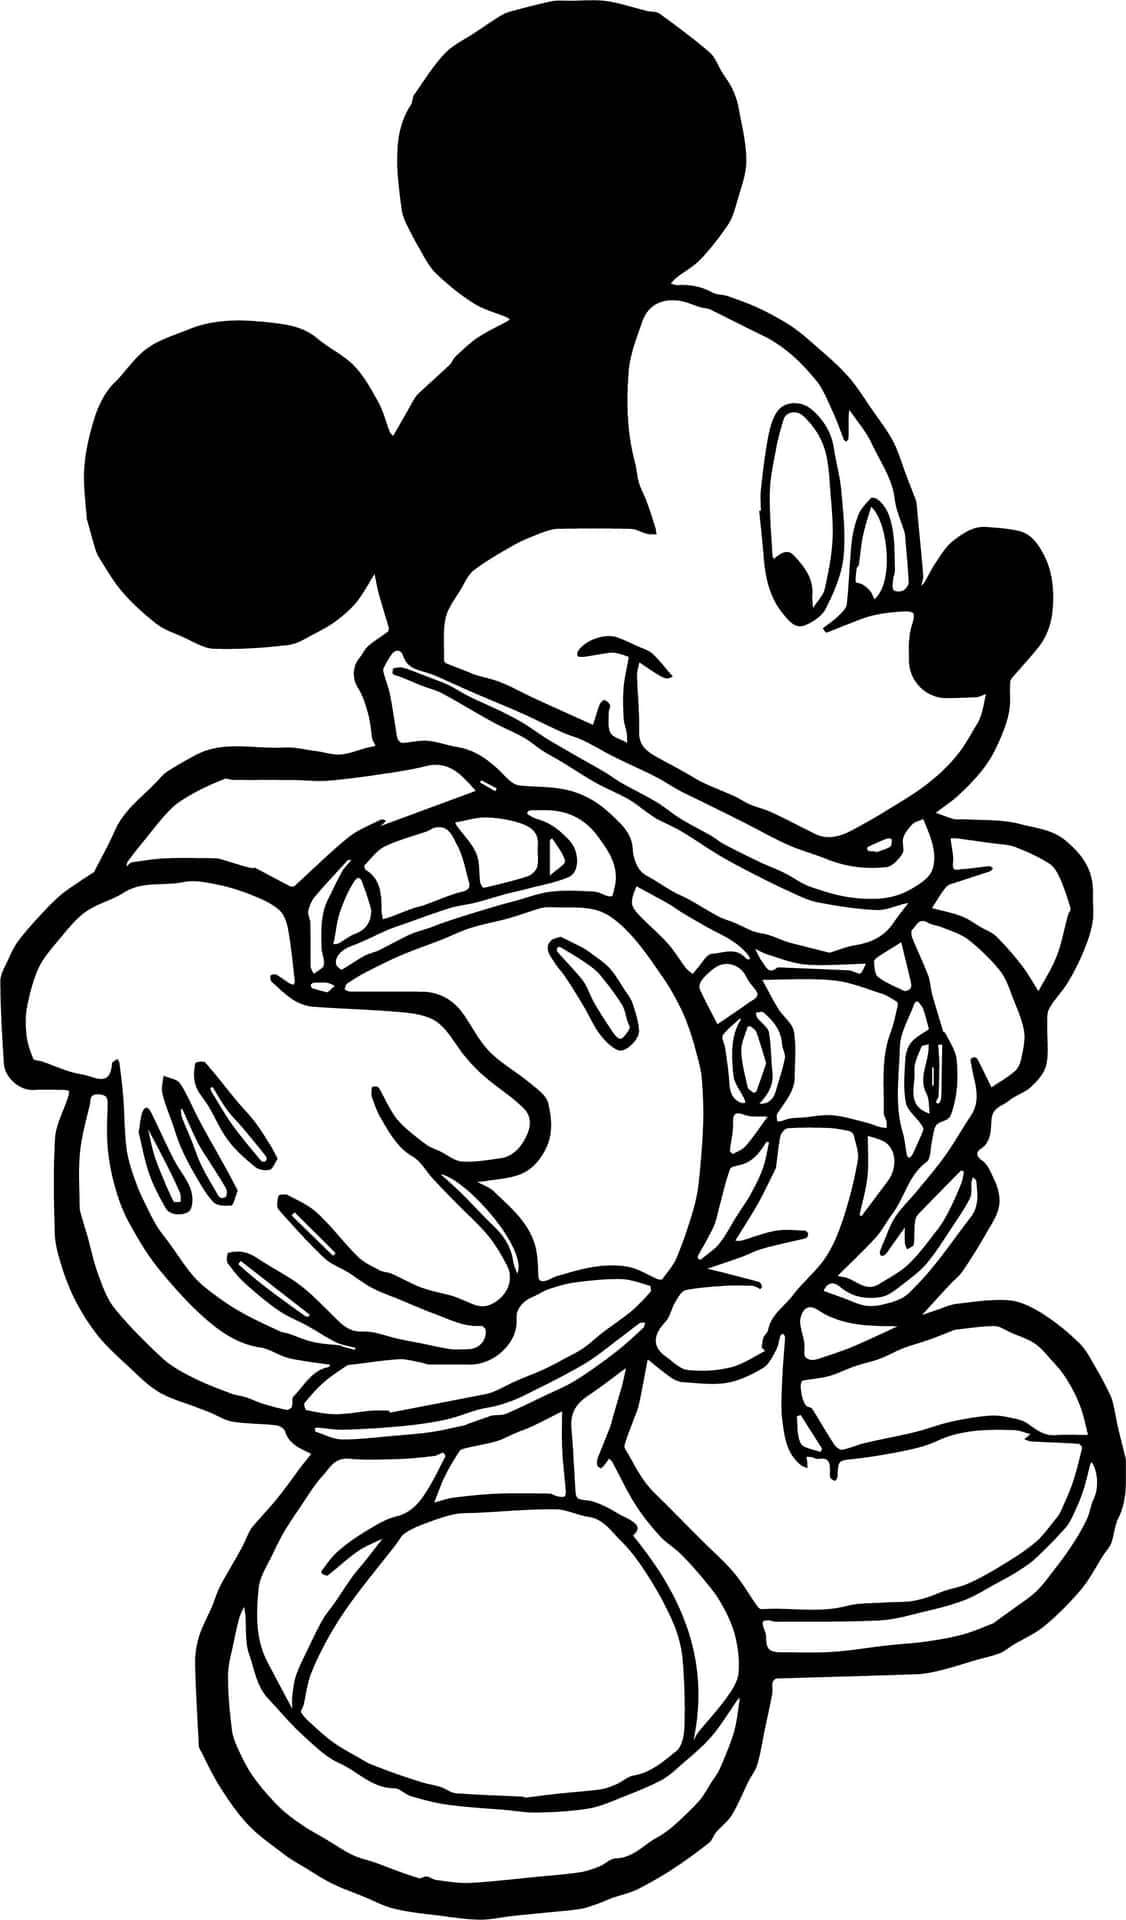 Color your favorite Disney character with this Mickey Mouse coloring page